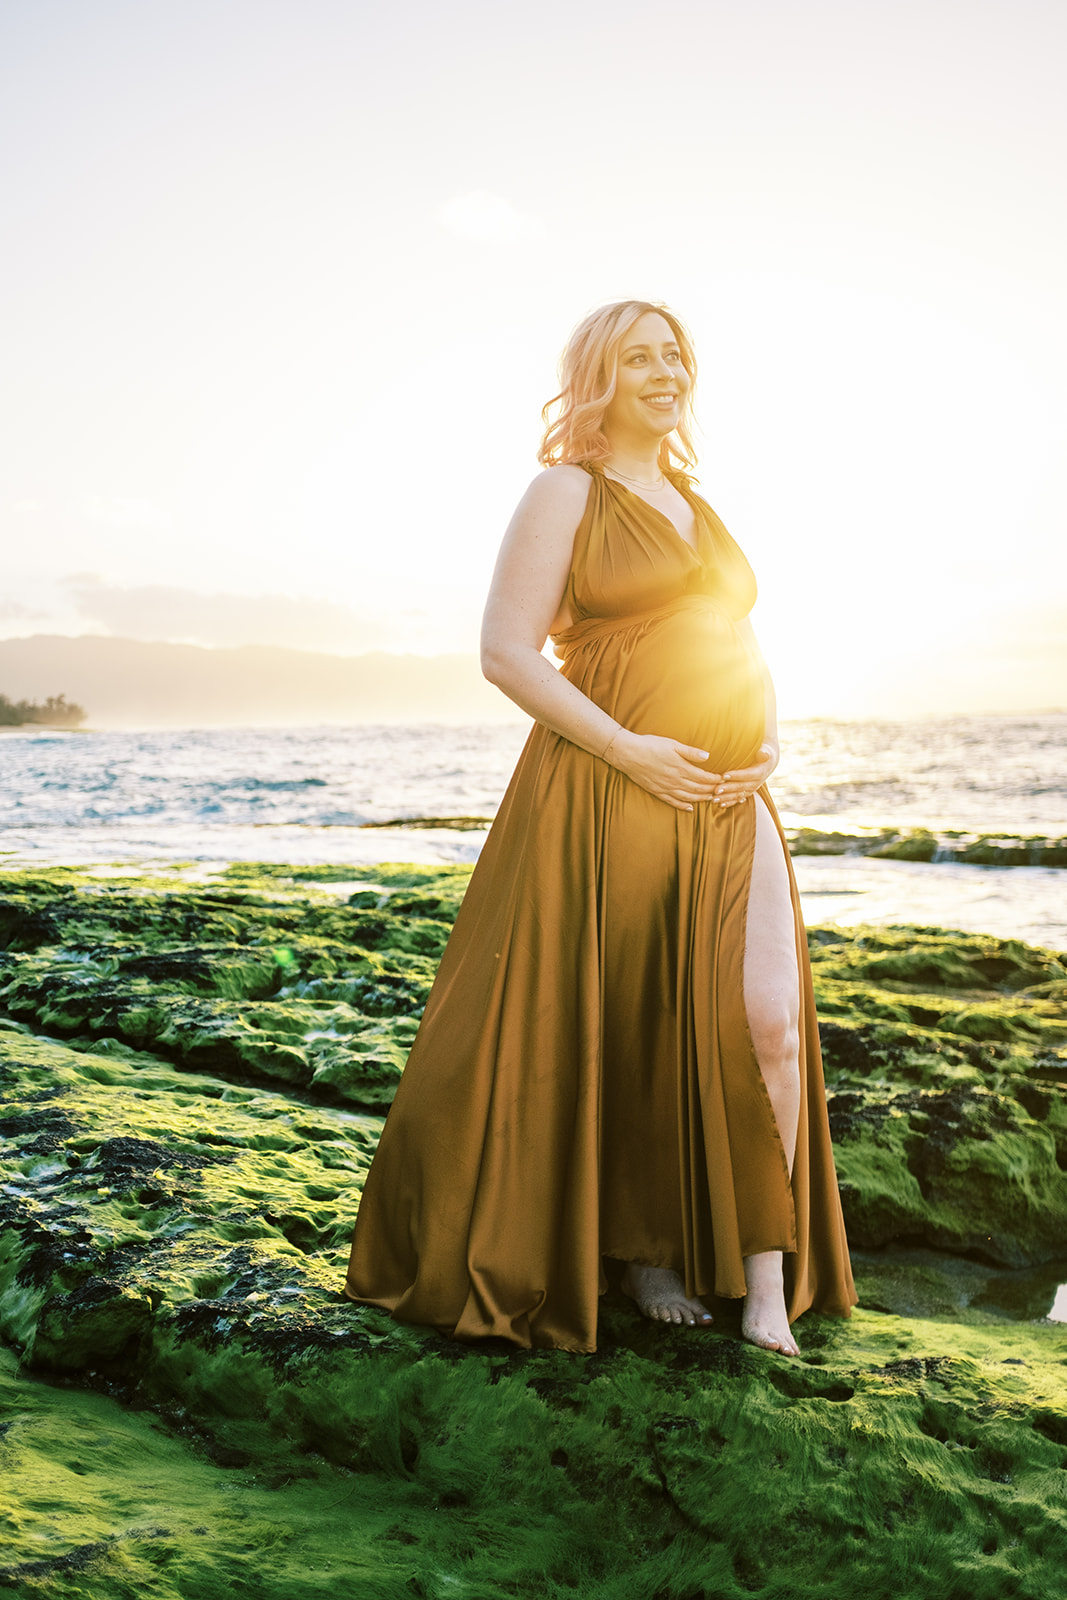 Pregnant woman in a flowing dress standing on a moss-covered shore during sunset Maternity Session on Oahu